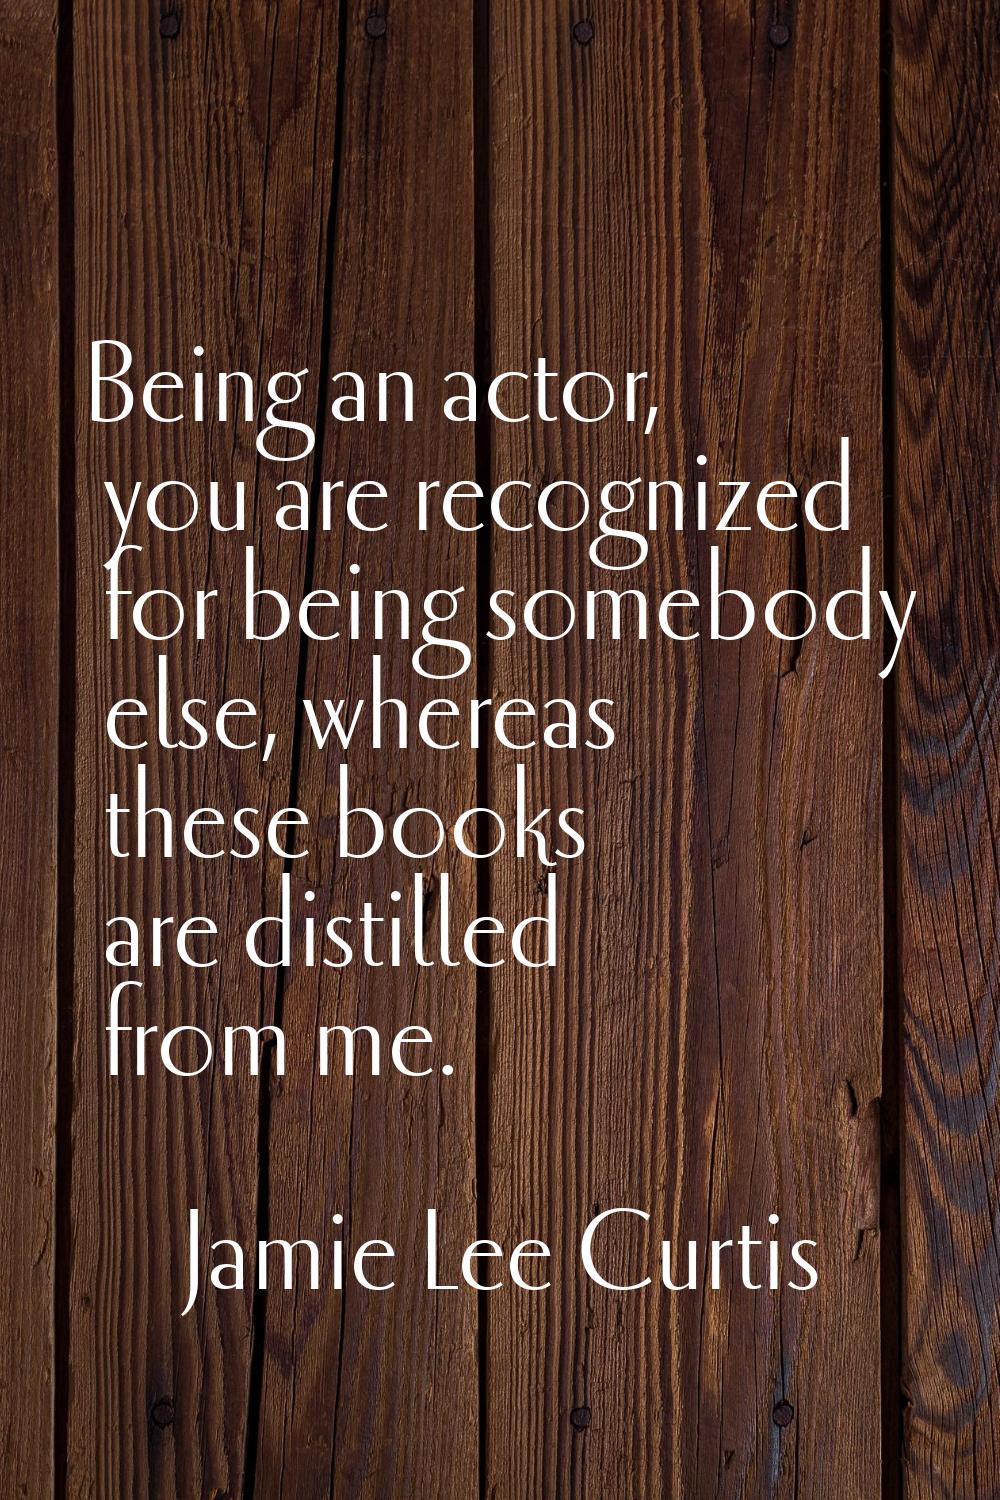 Being an actor, you are recognized for being somebody else, whereas these books are distilled from 